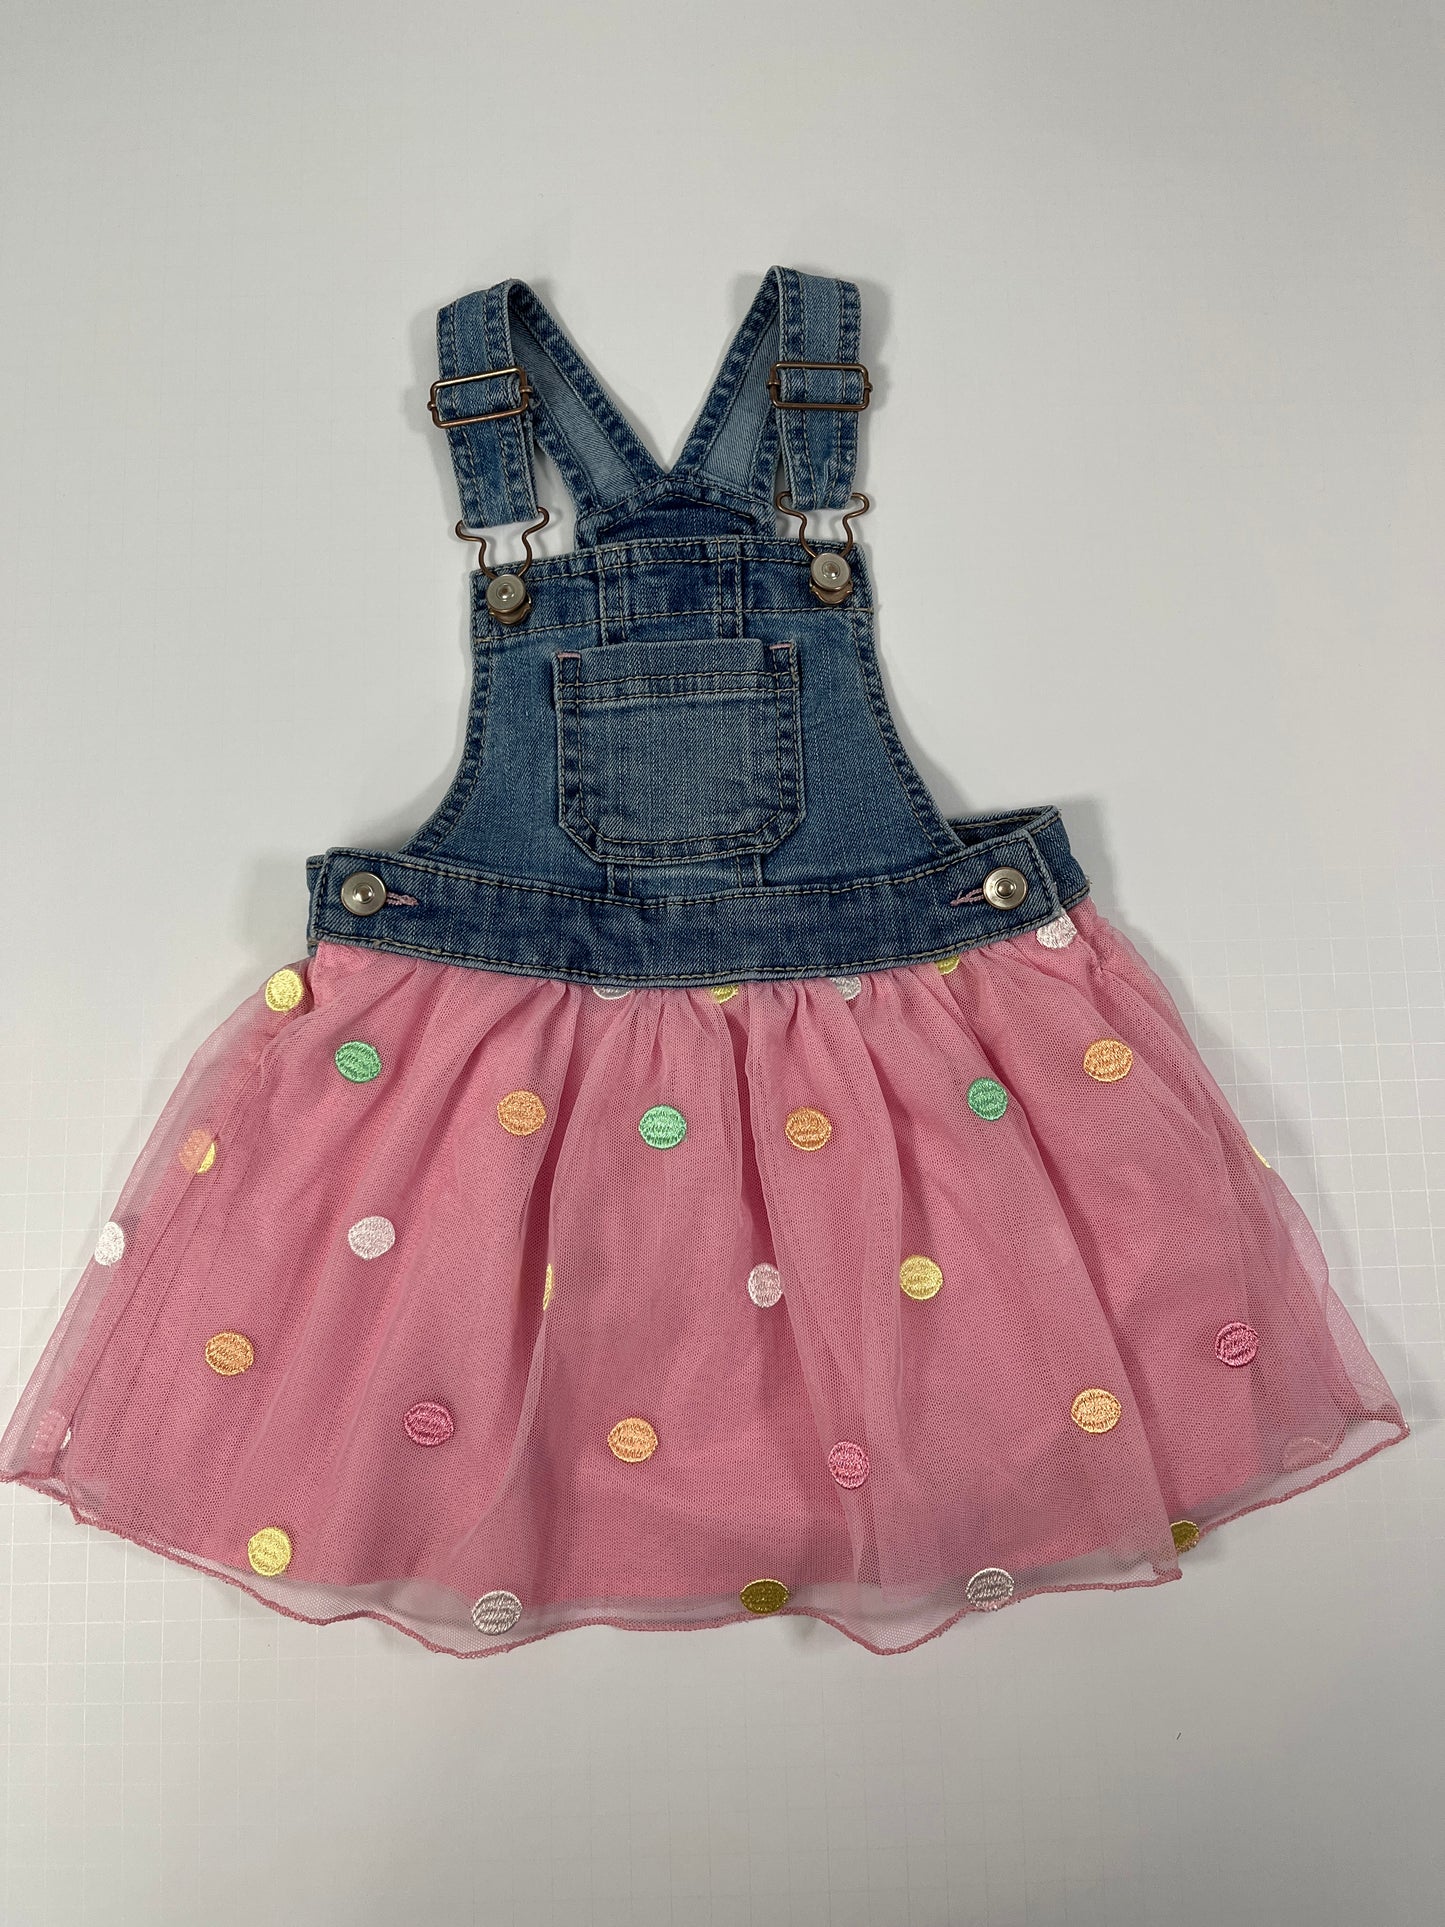 PPU 45242 2T girls Wonder Nation overall tulle tutu dress with polka dots